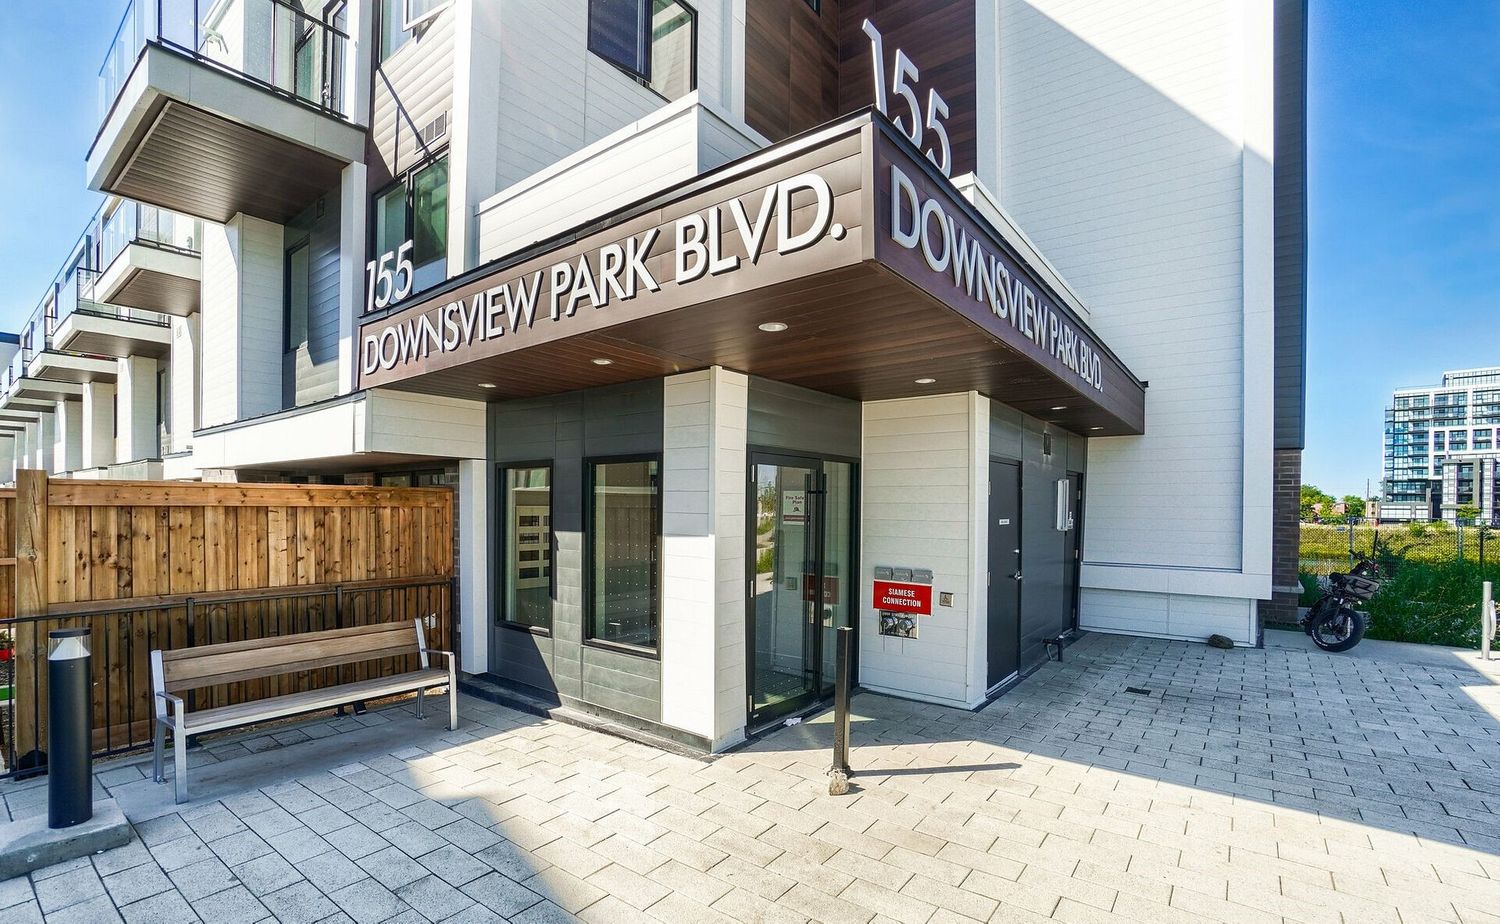 155 Downsview Park Boulevard. Parkside Towns at Saturday is located in  Hamilton, Toronto - image #3 of 3